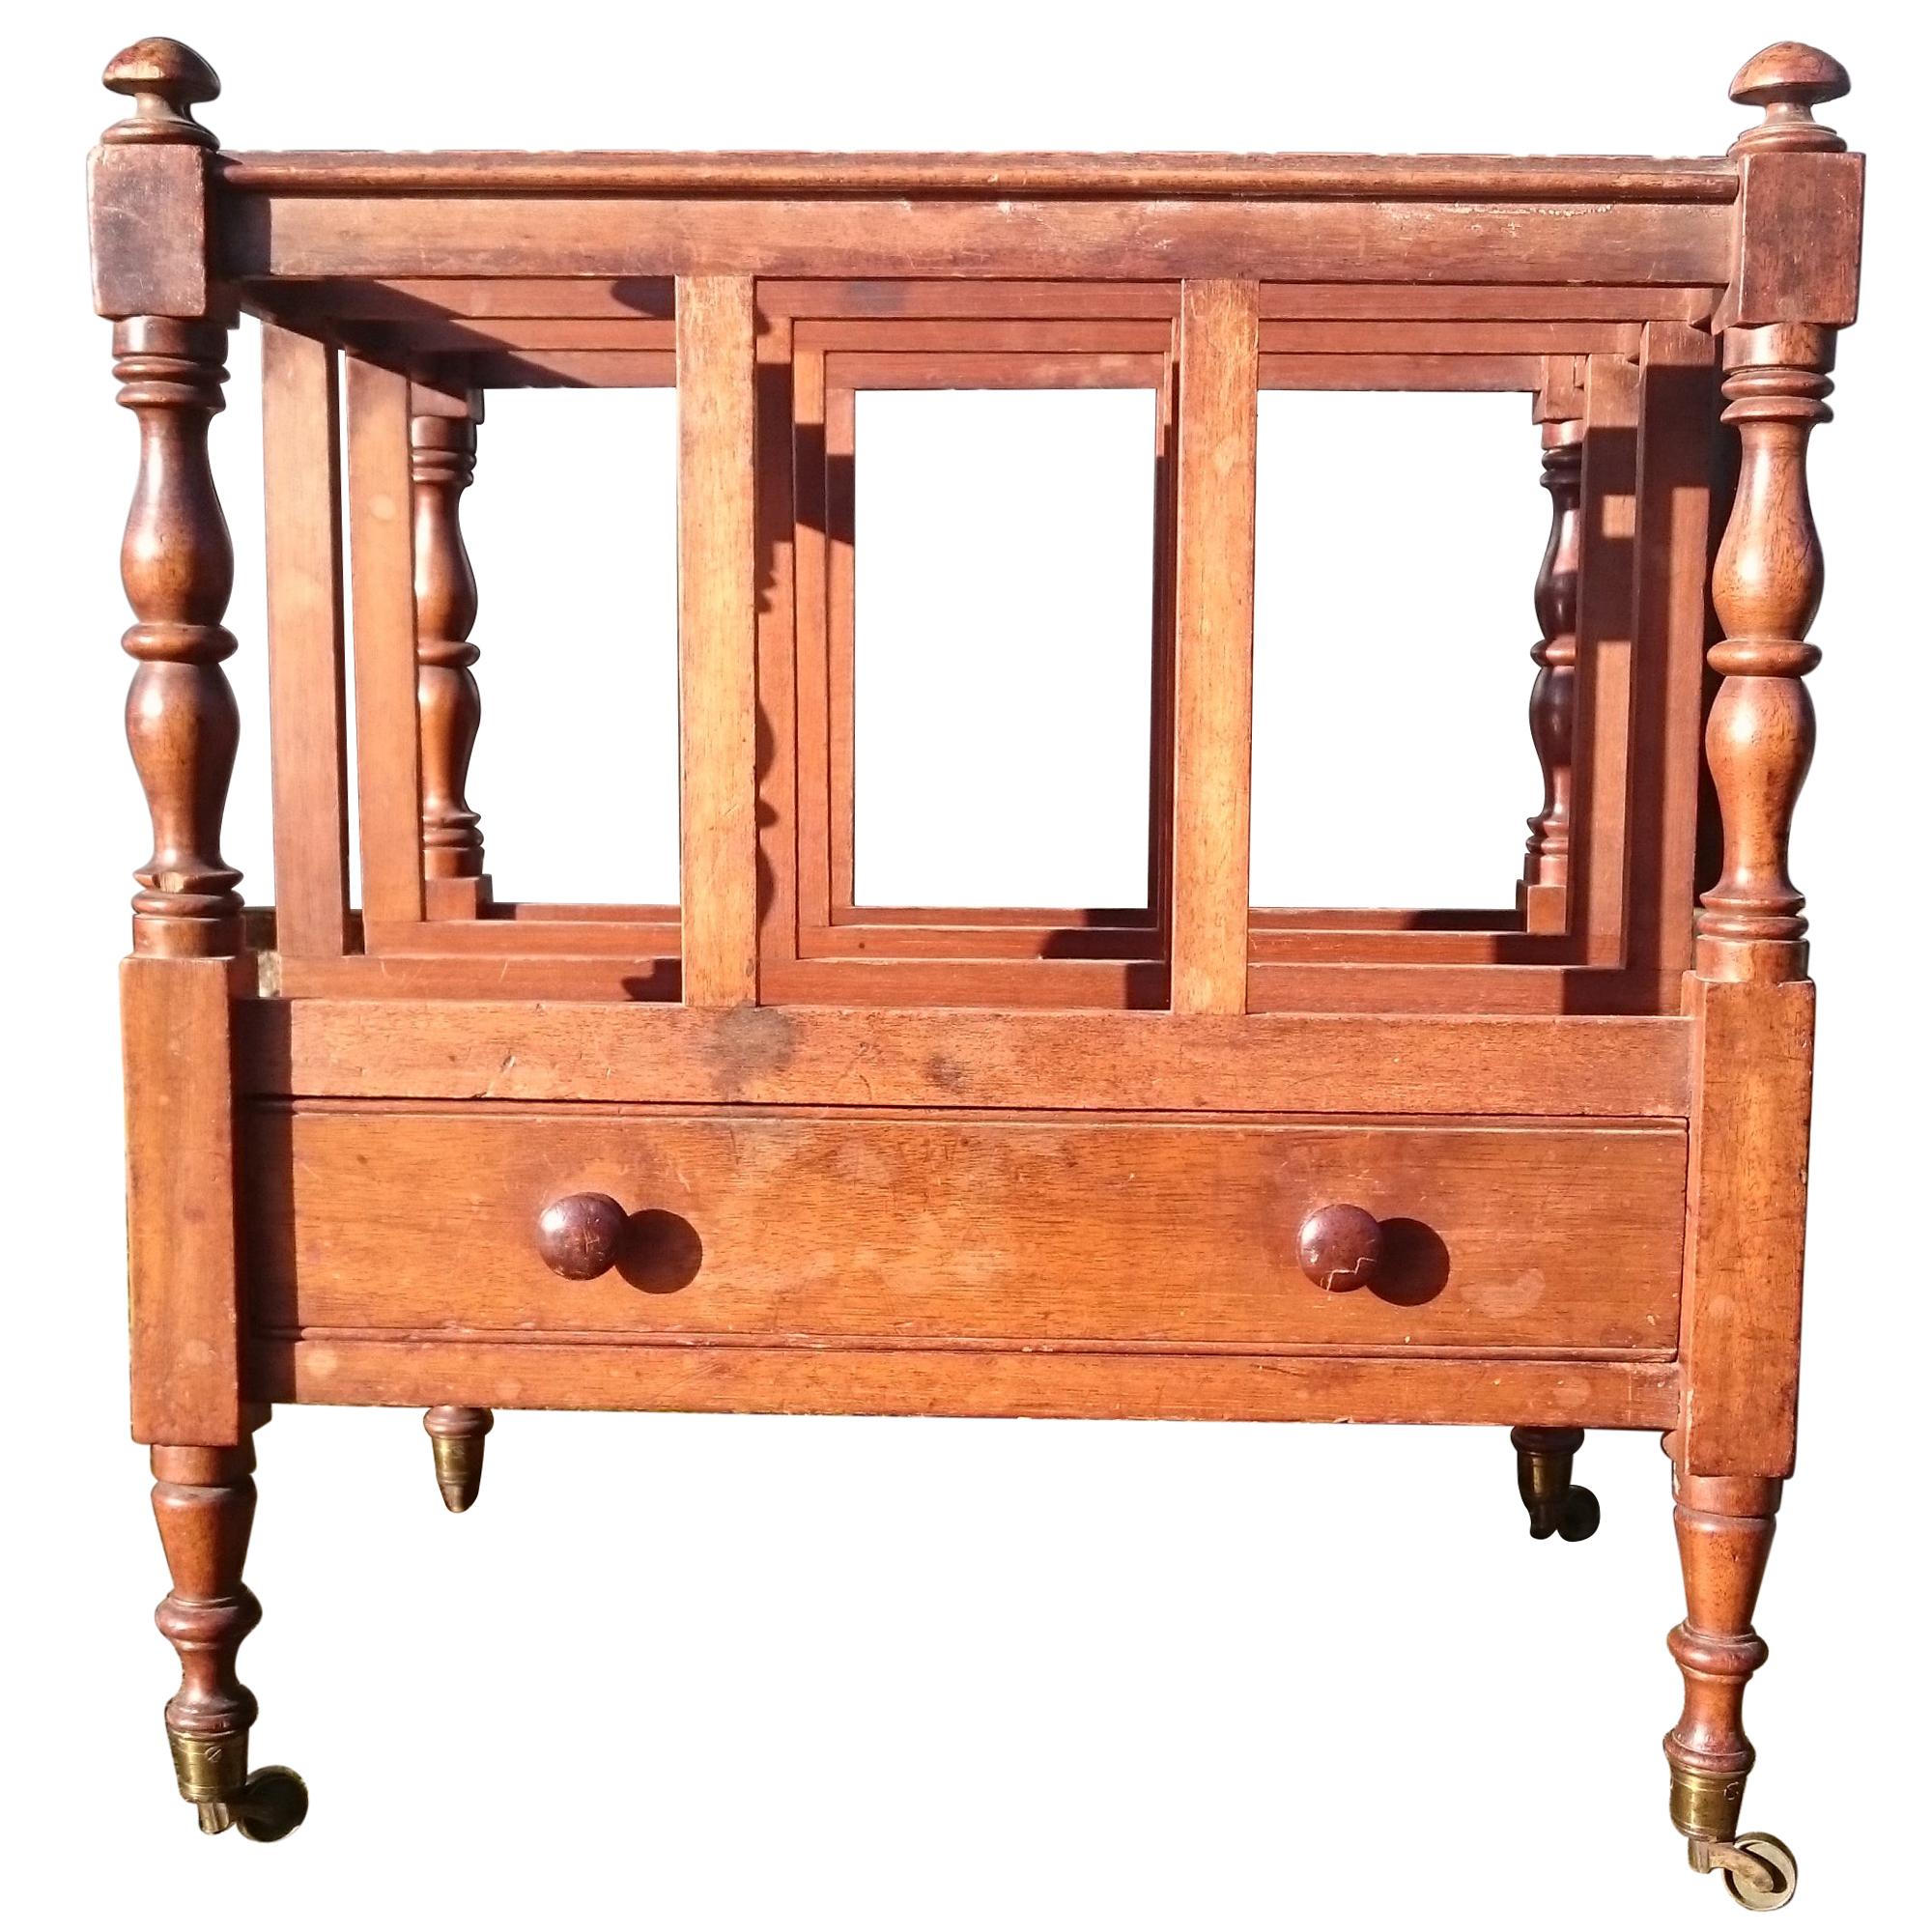 Early 20th Century Mahogany Canterbury / Magazine Rack Made by Howard and Sons For Sale